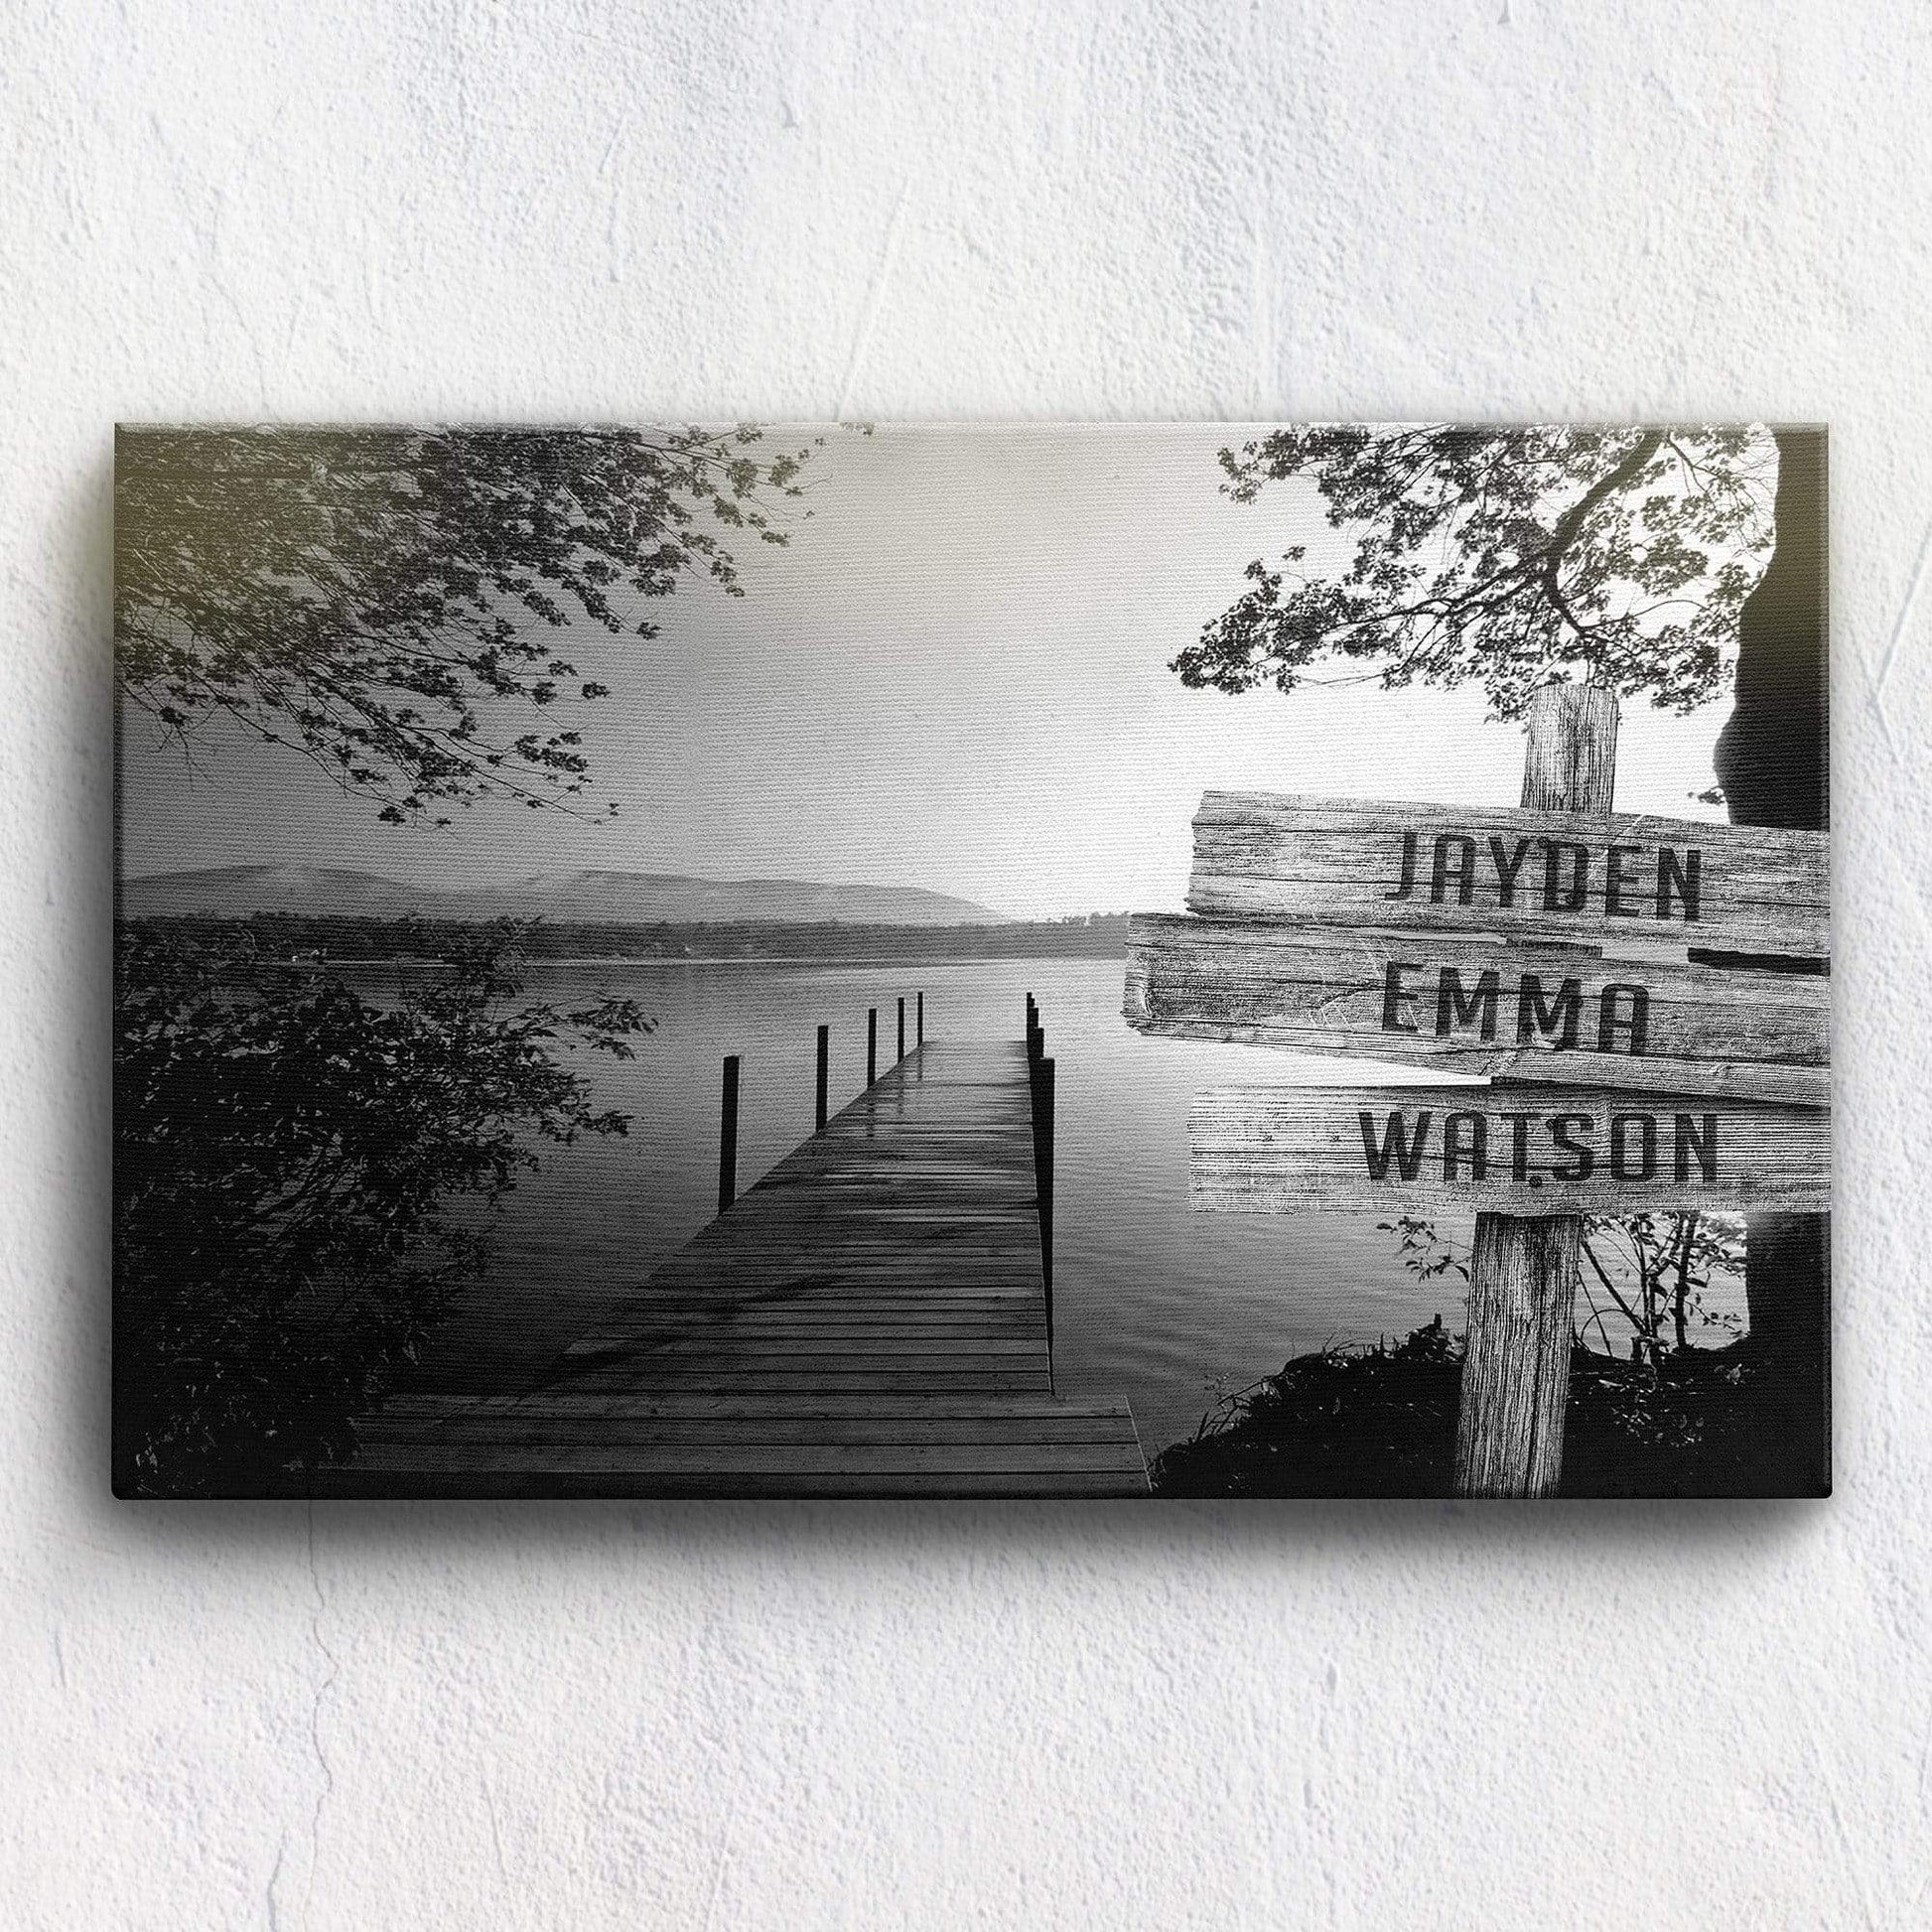 Customized Canvas 36" X 24" - BEST SELLER Lake Dock Personalized Canvas With Multi Names